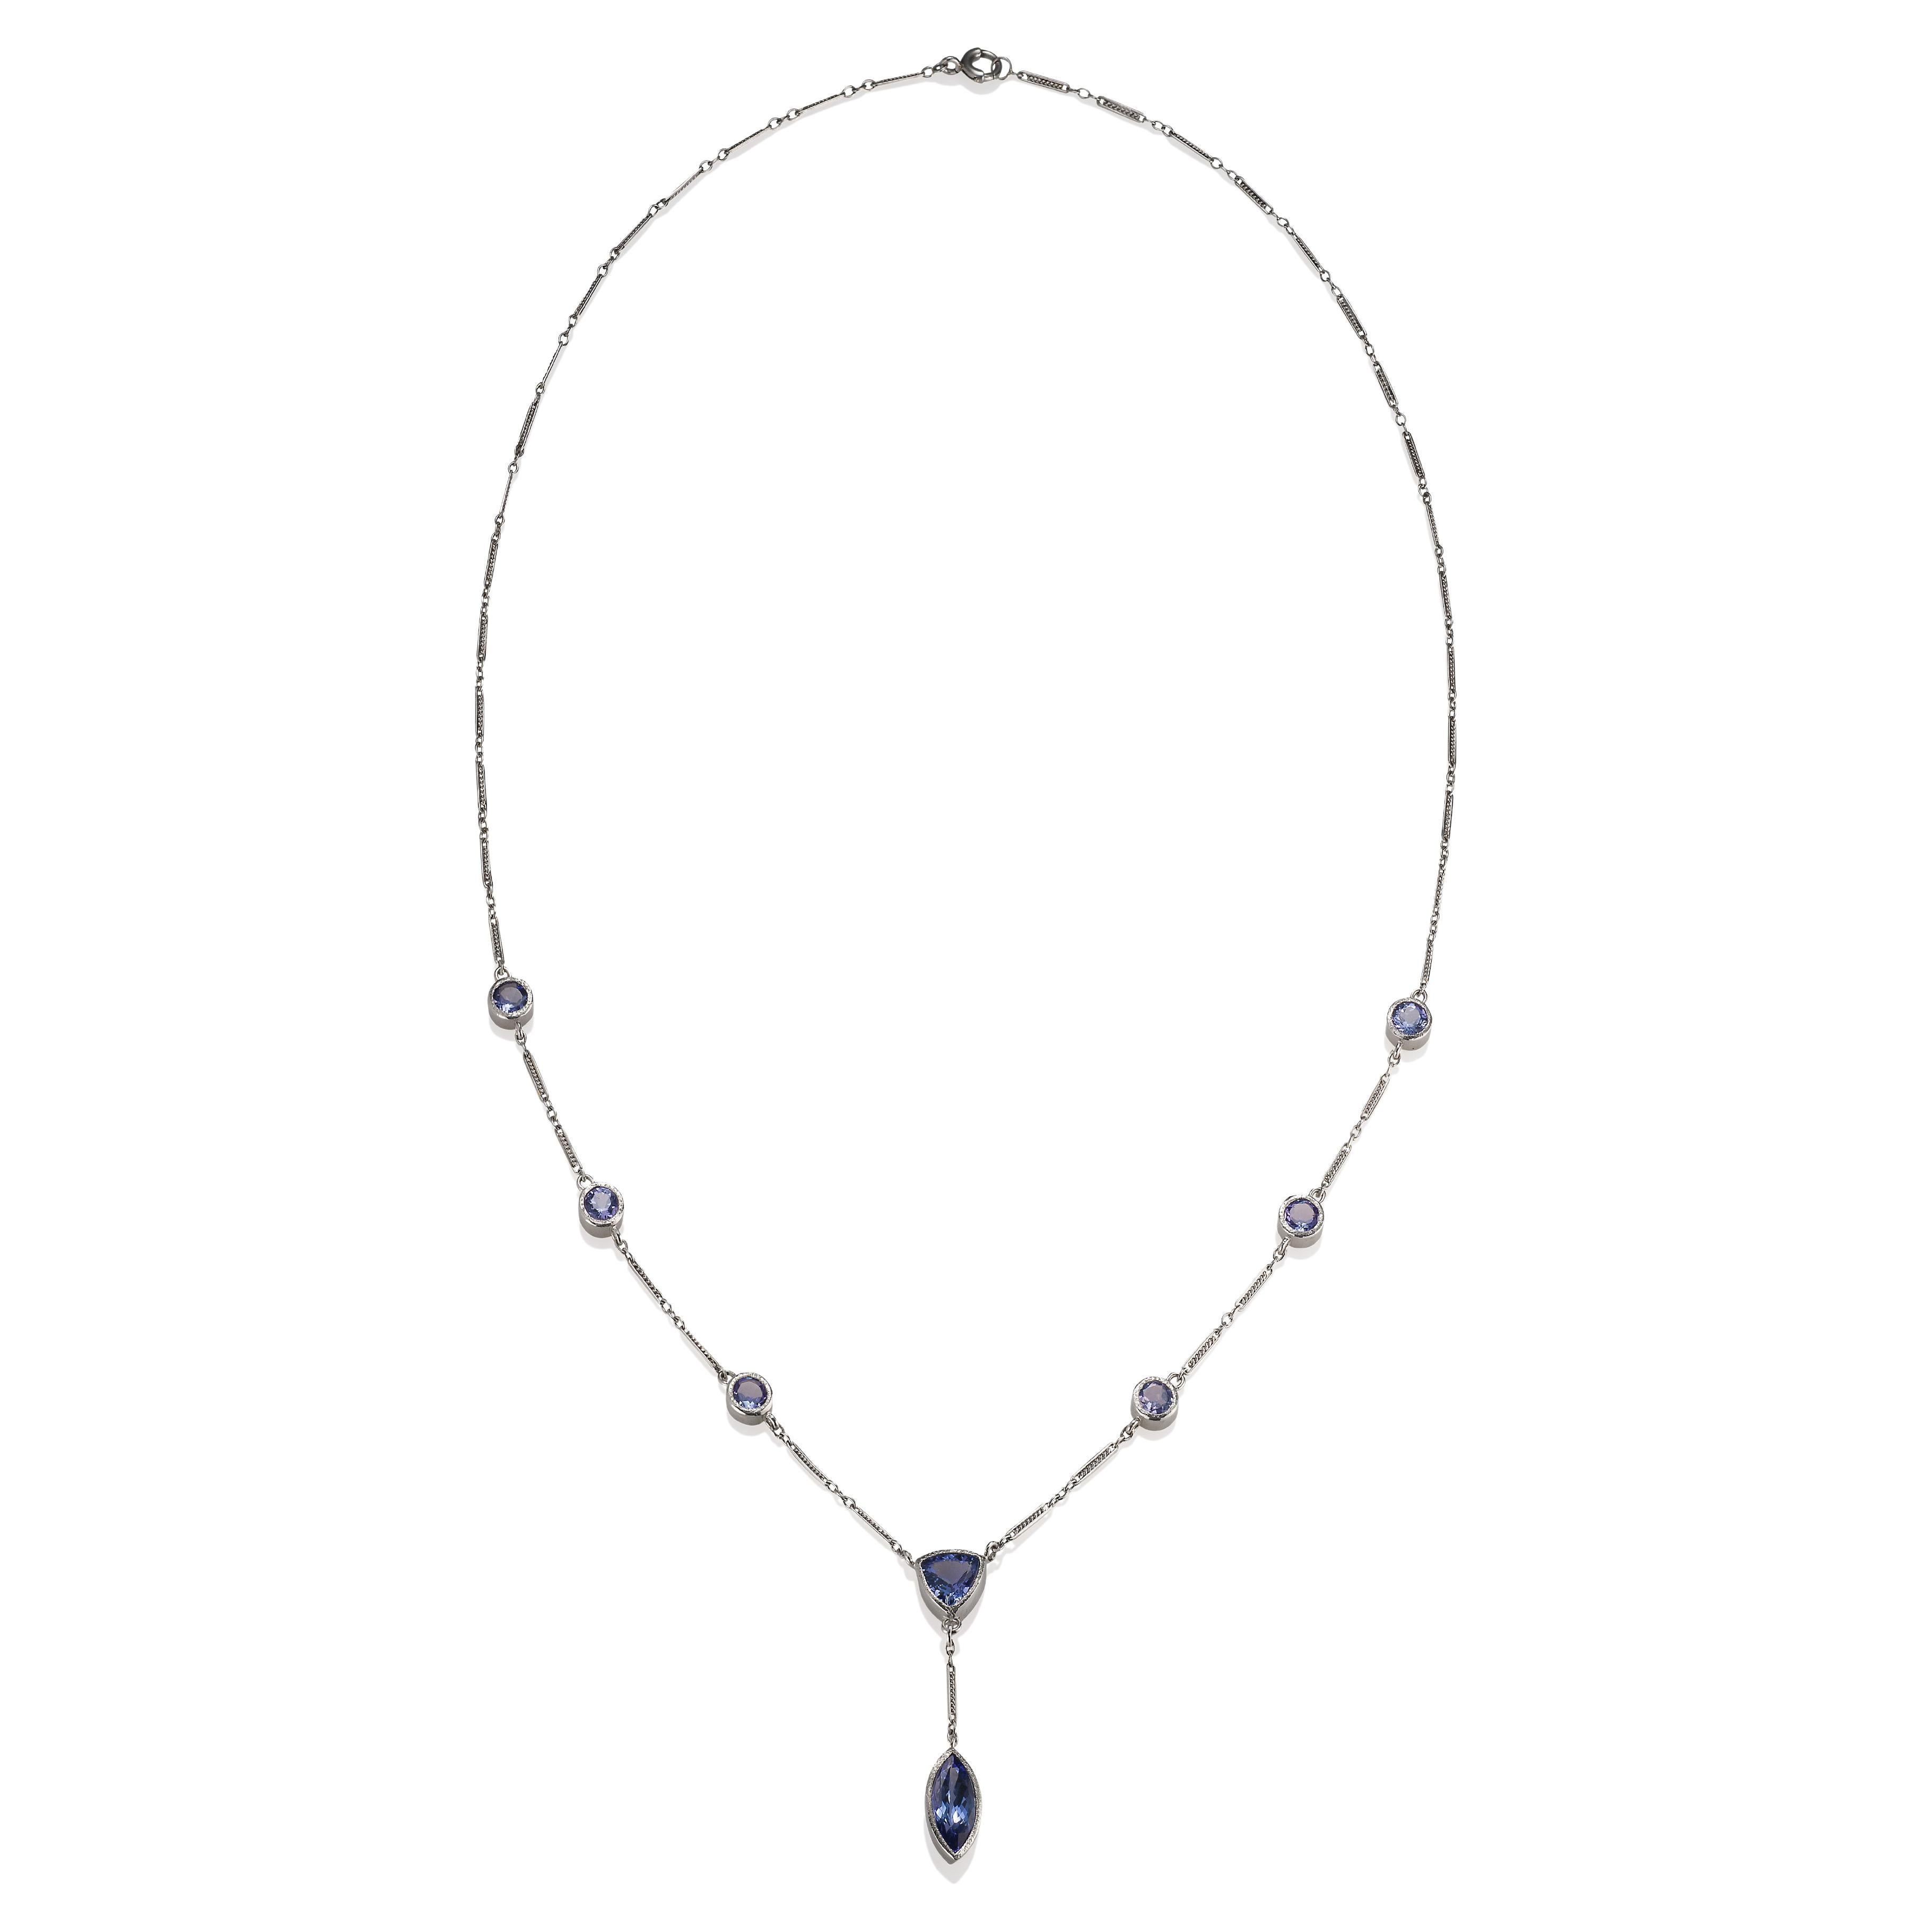 Platinum and Tanzanite (3.87 CTW) Dune Necklace is an inspiration from the Frank Herbert book DUNE, in which a necklace was described in great detail, this is how I imagined the necklace would look.
I have repurposed a vintage Platinum chain to add